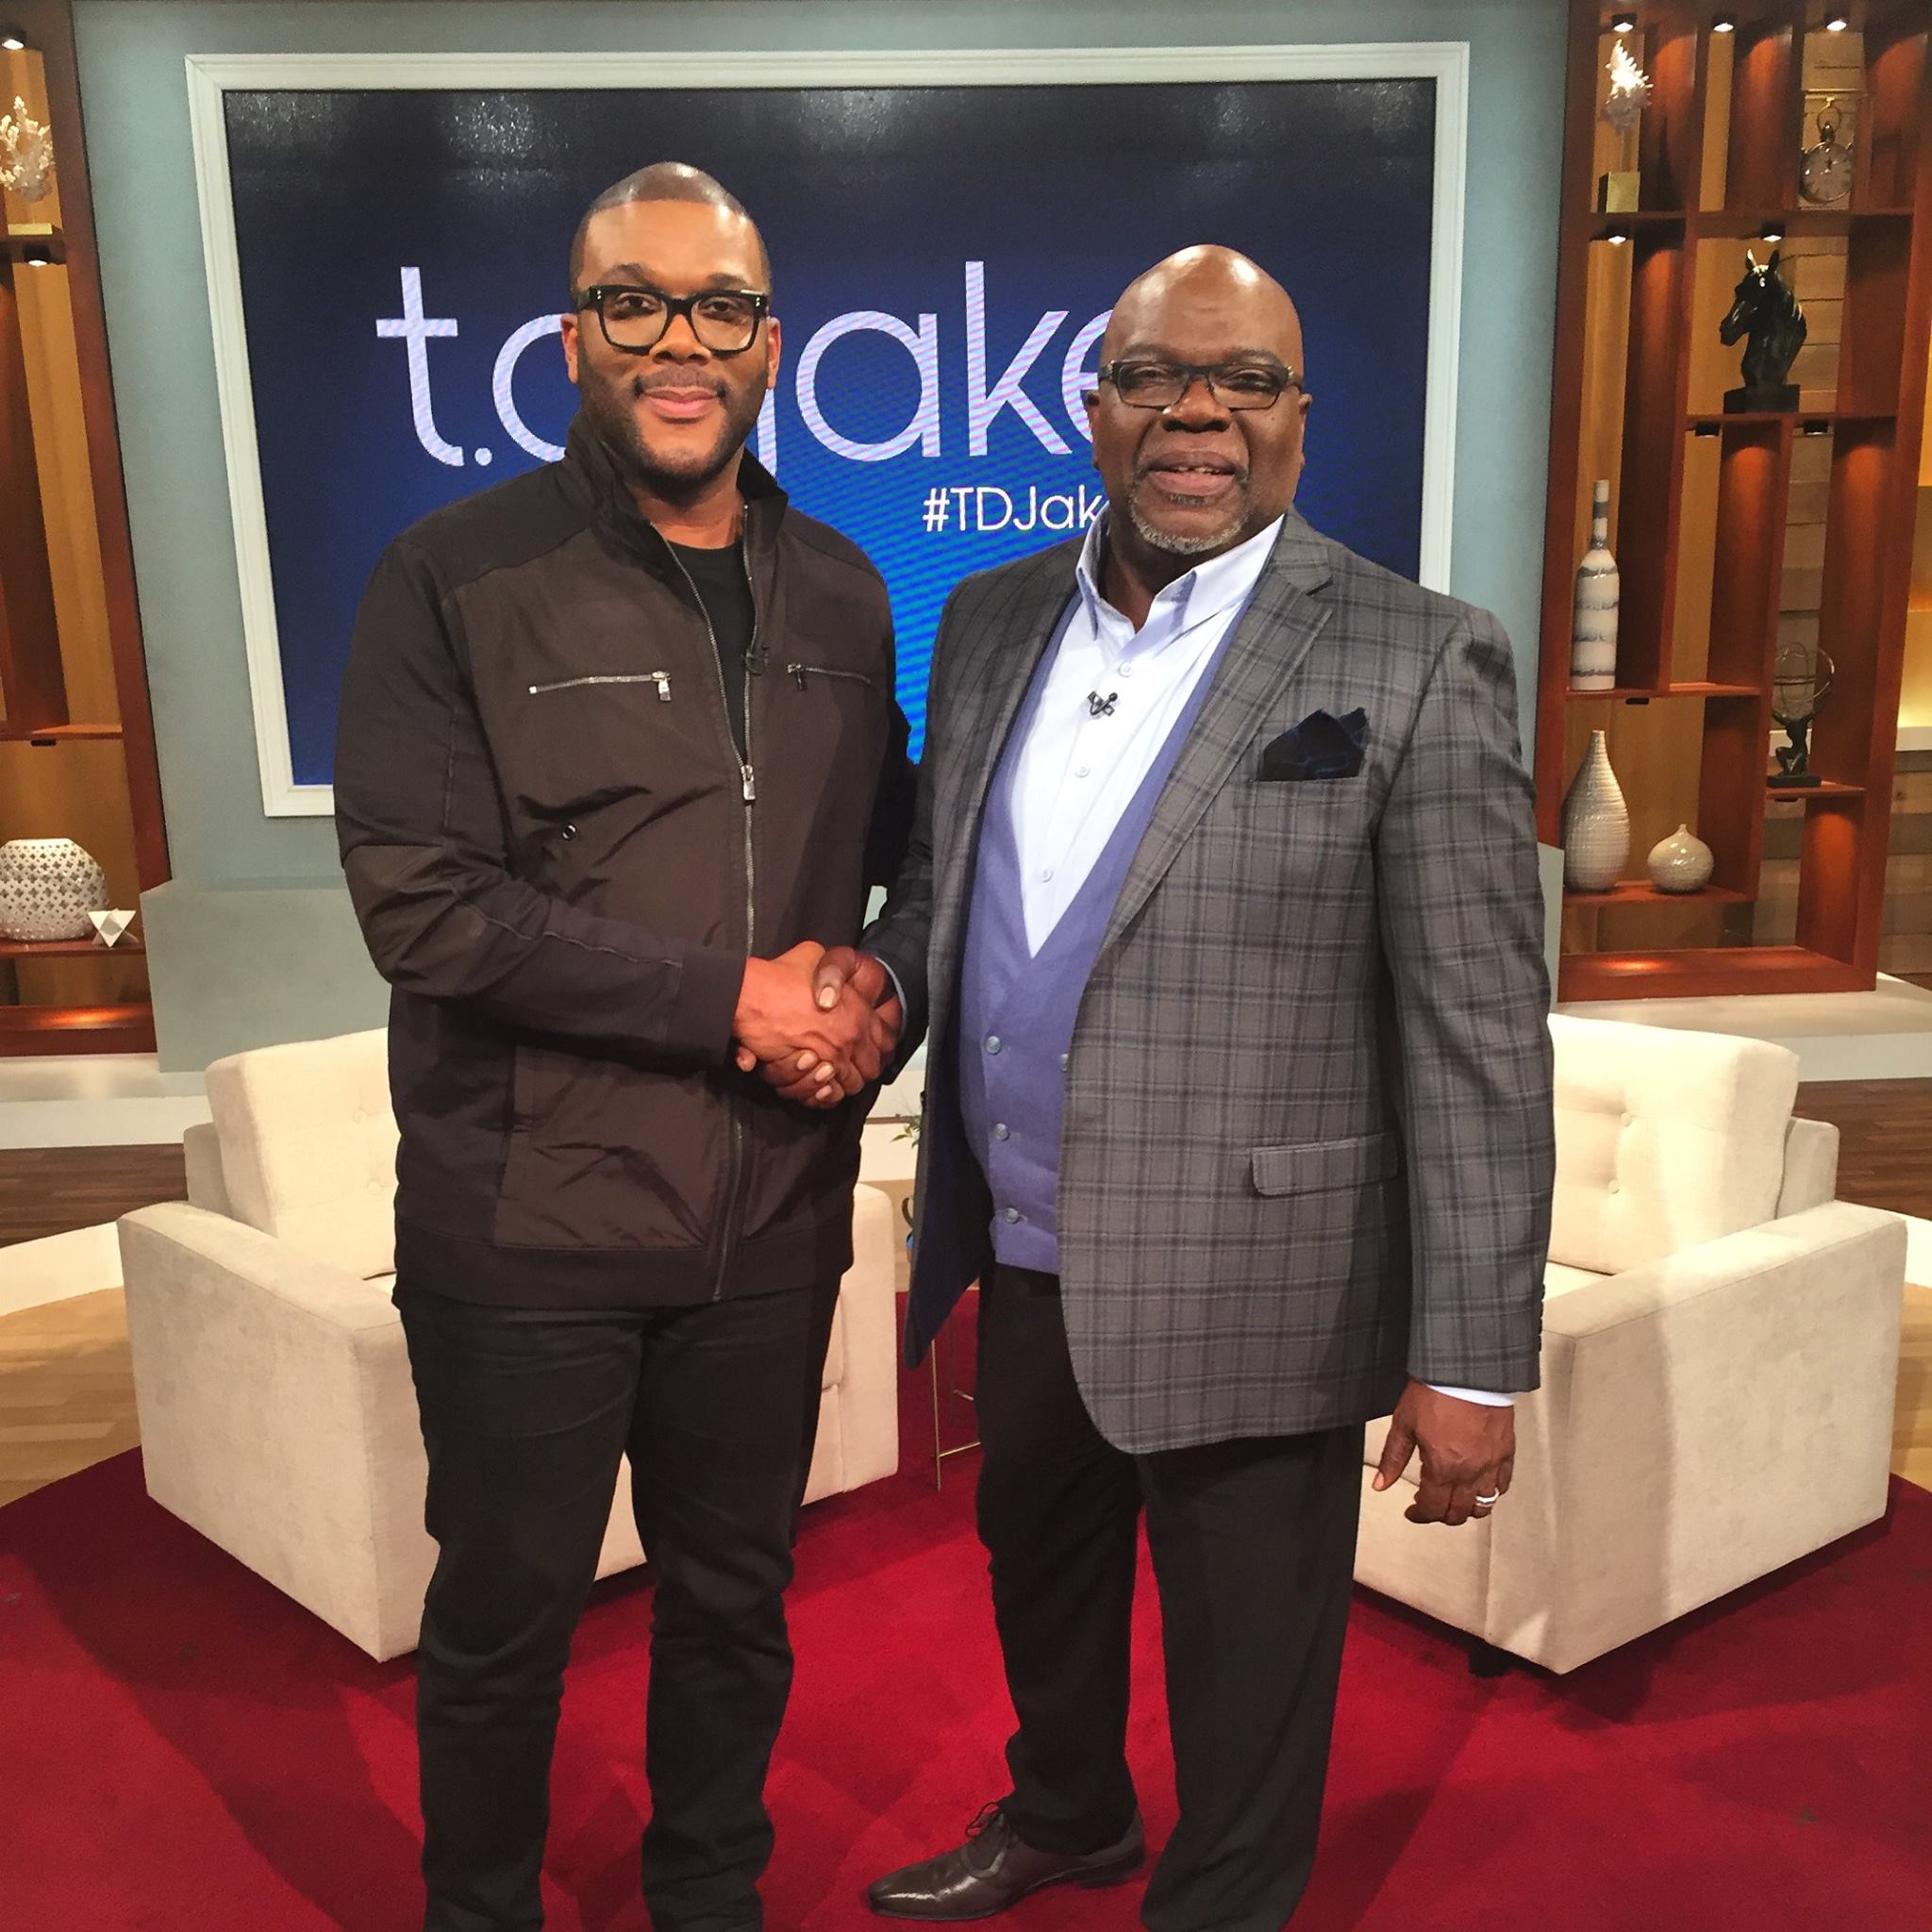 Video: Tyler Perry’s Moment with TD Jakes: Inspirational Gesture at the Potter House